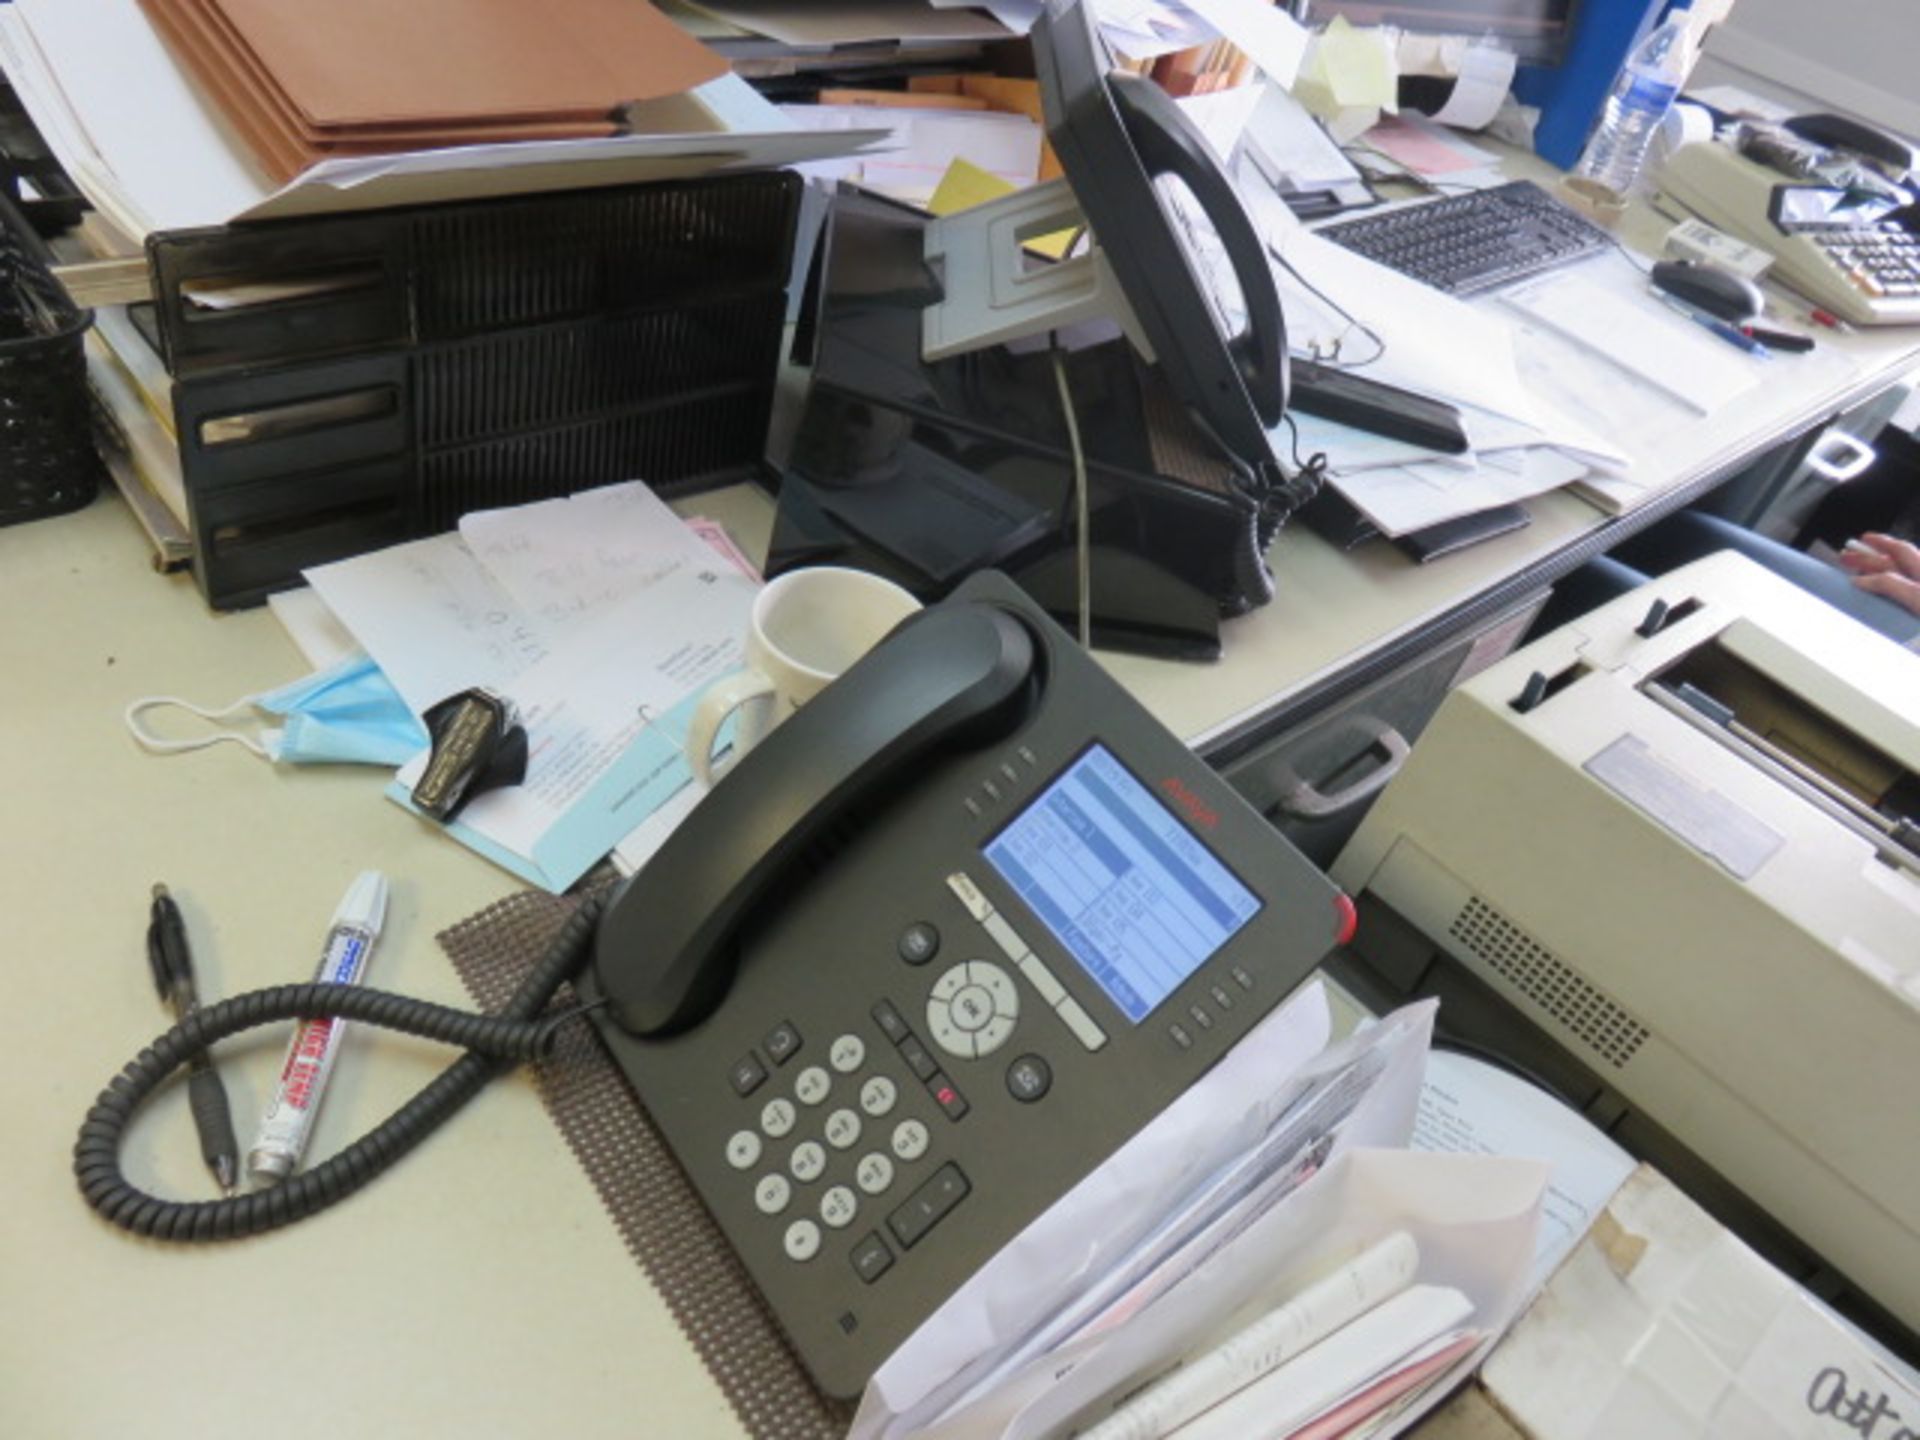 AVAYA PHONE SYSTEM W/ IP OFFICE 500 V2 and (16) 9508 TELEPHONES (MUST BE REMOVED APRIL 9TH) - Image 3 of 3